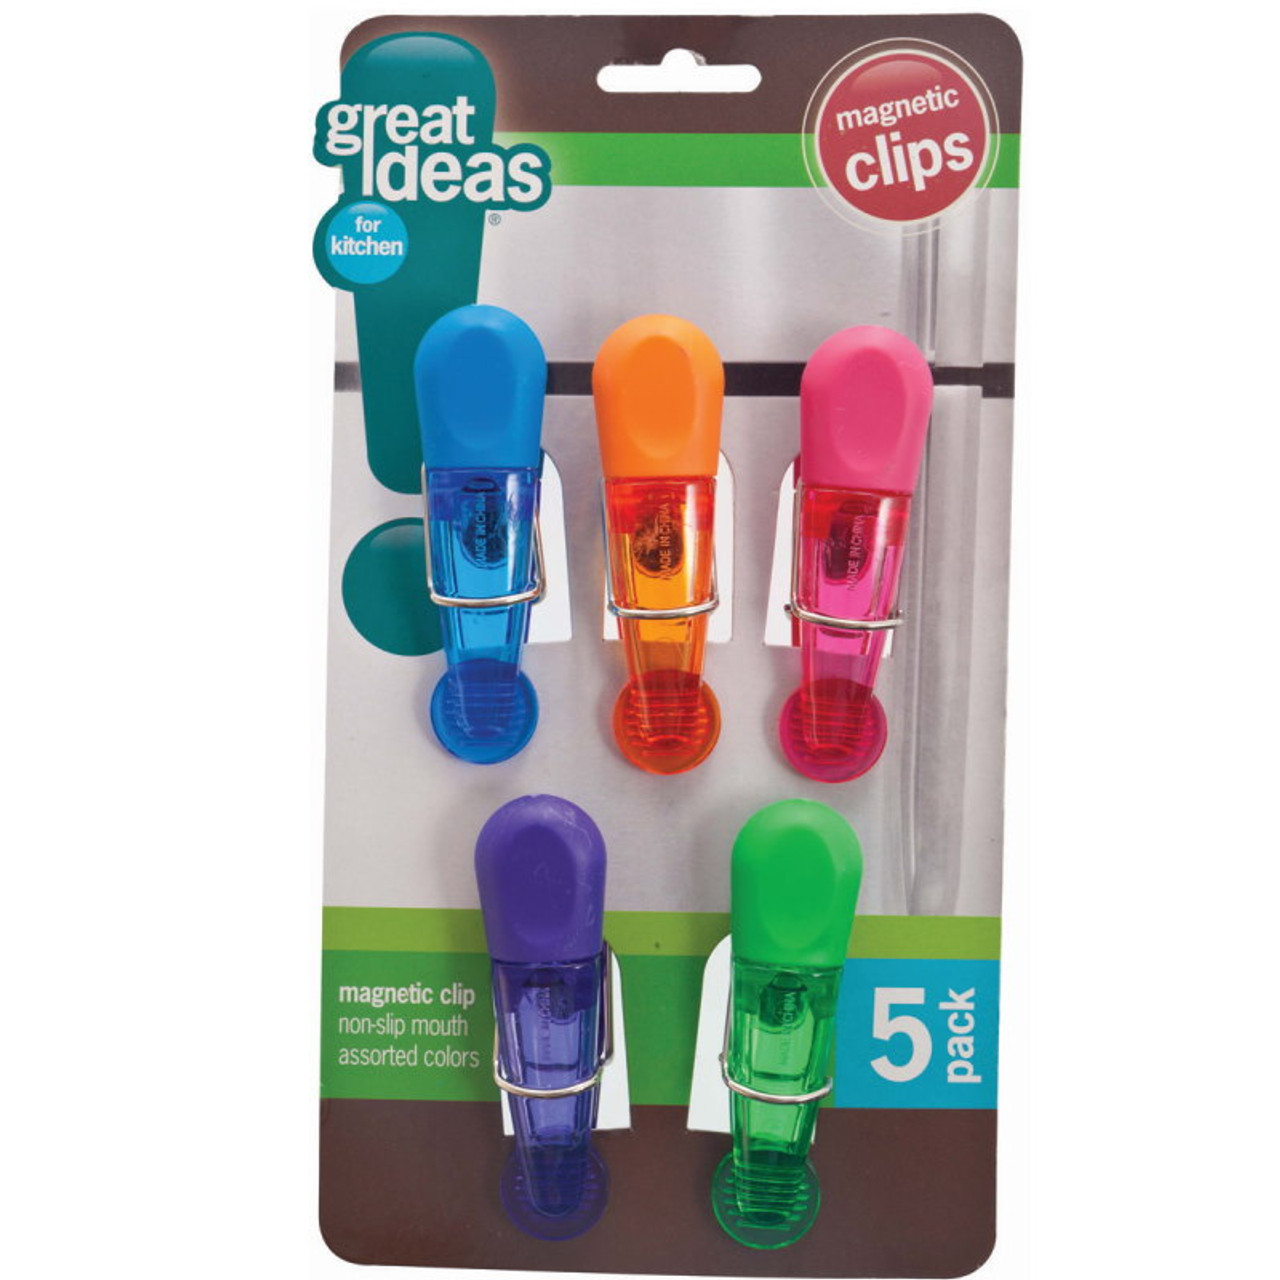 OXO Good Grips Magnetic All-Purpose Clips (4-Pack)